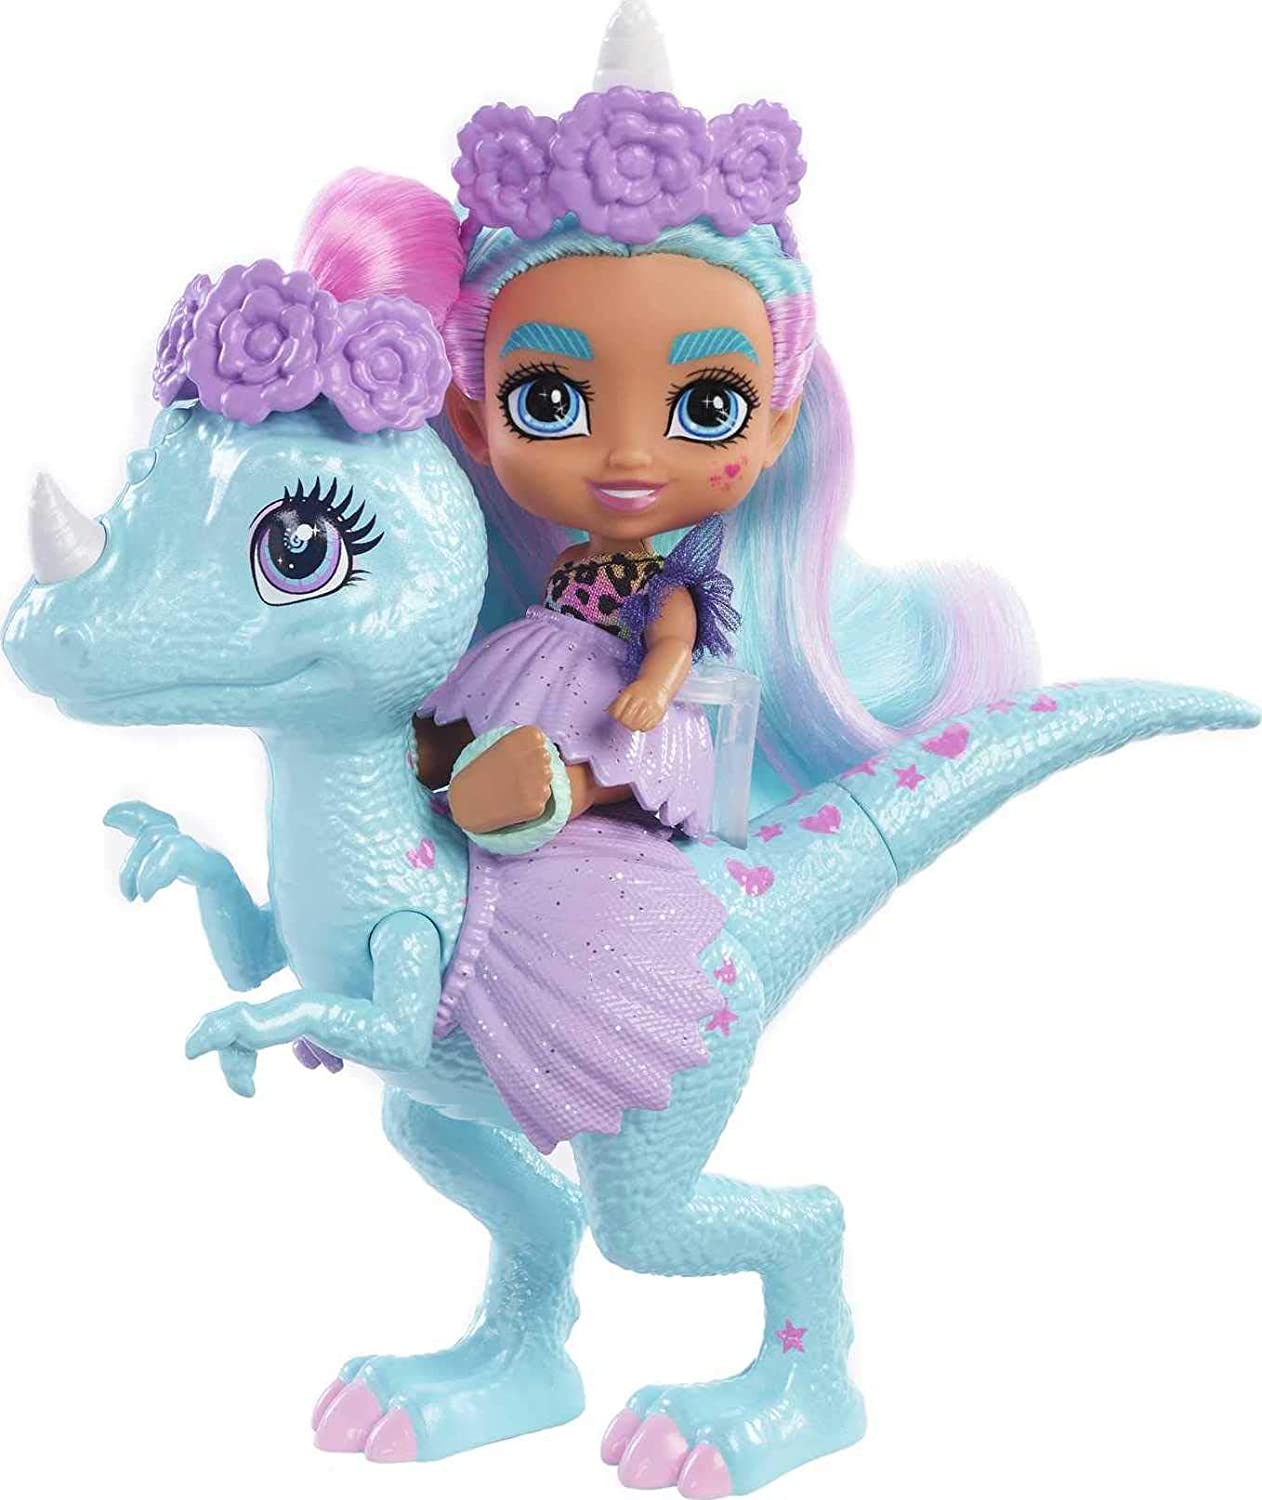 Mattel Cave Club Cave Tots Rebel Tot Doll Small Doll with Dinosaur & Curly Purple Hair Wearing Outfit & Accessories Approx. 3.5-in Gift for 4 Year Olds and Up